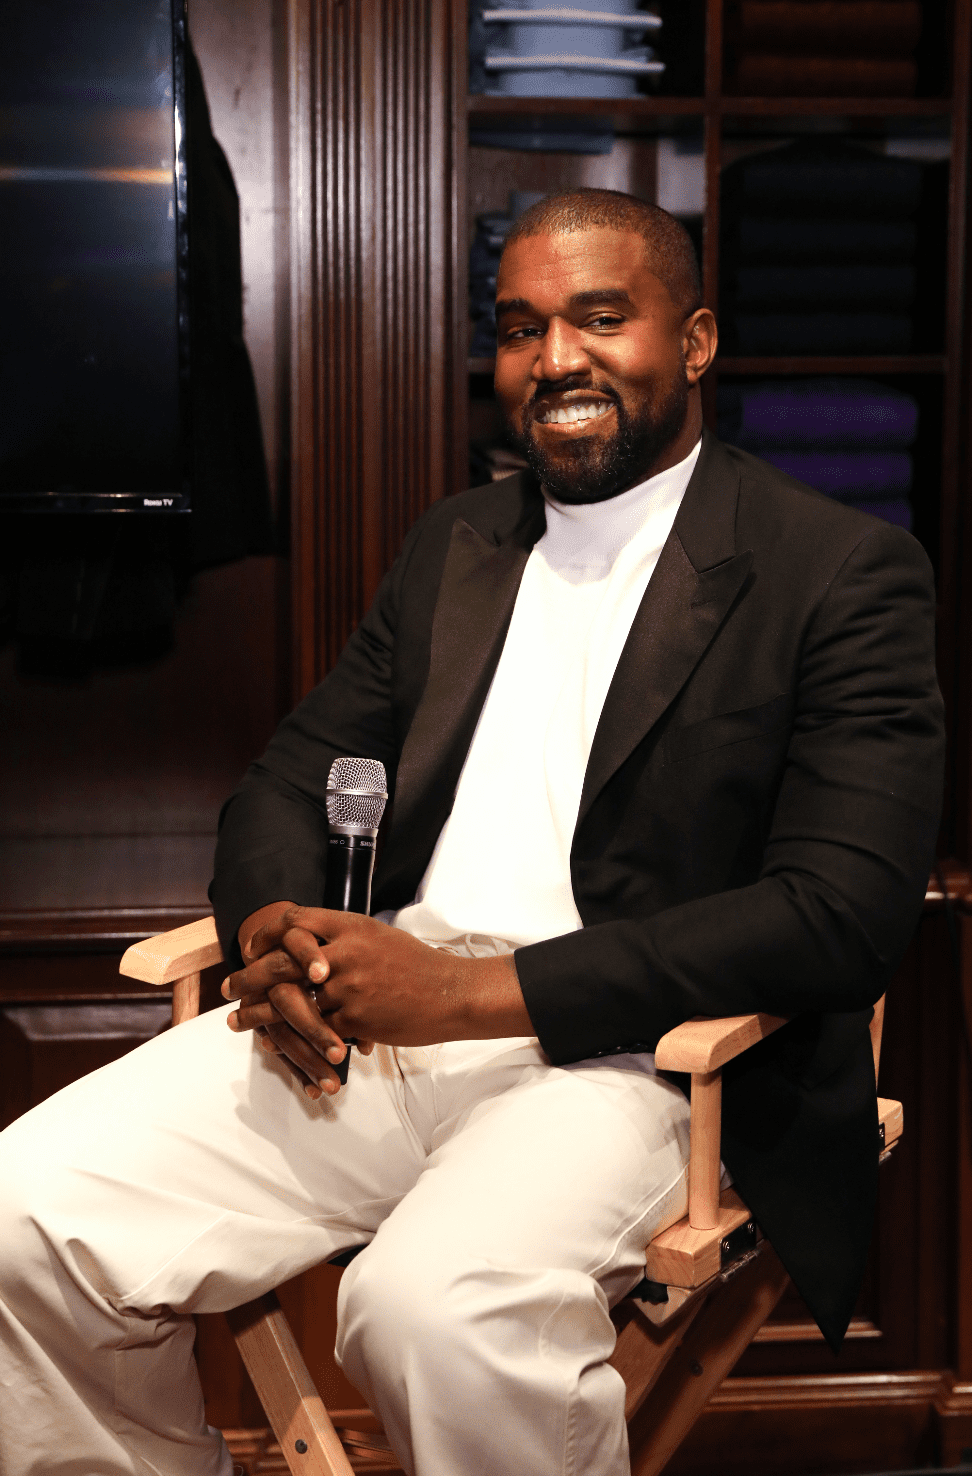 Kanye West attends Jim Moore Book Event At Ralph Lauren Chicago on October 28, 2019 in Chicago, Illinois. | Source: Getty Images